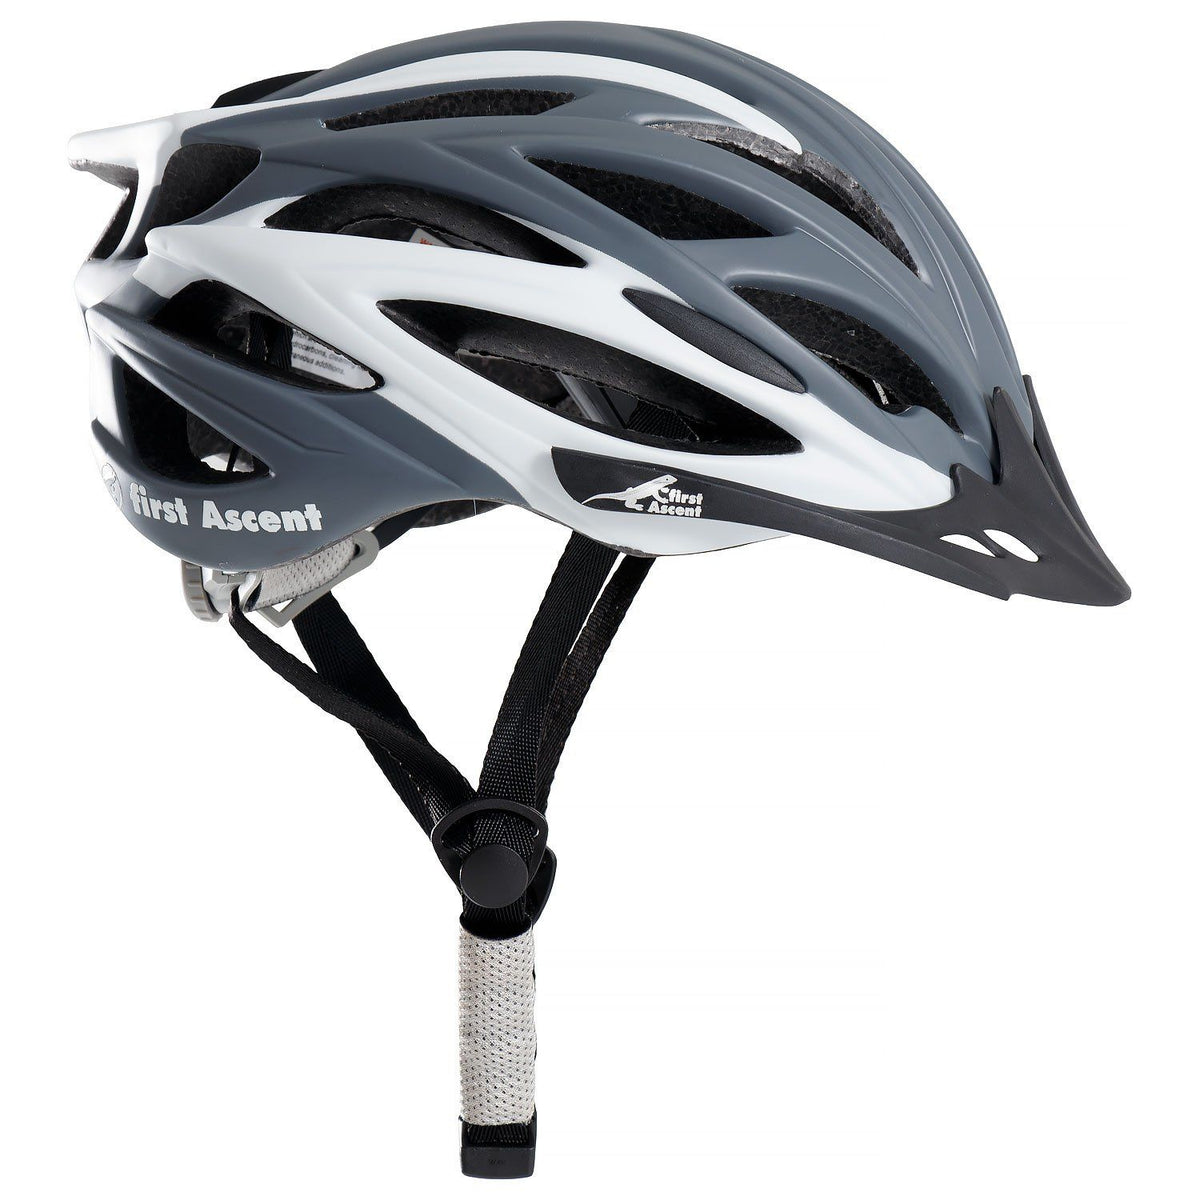 First Ascent Rapid Cycling Helmet